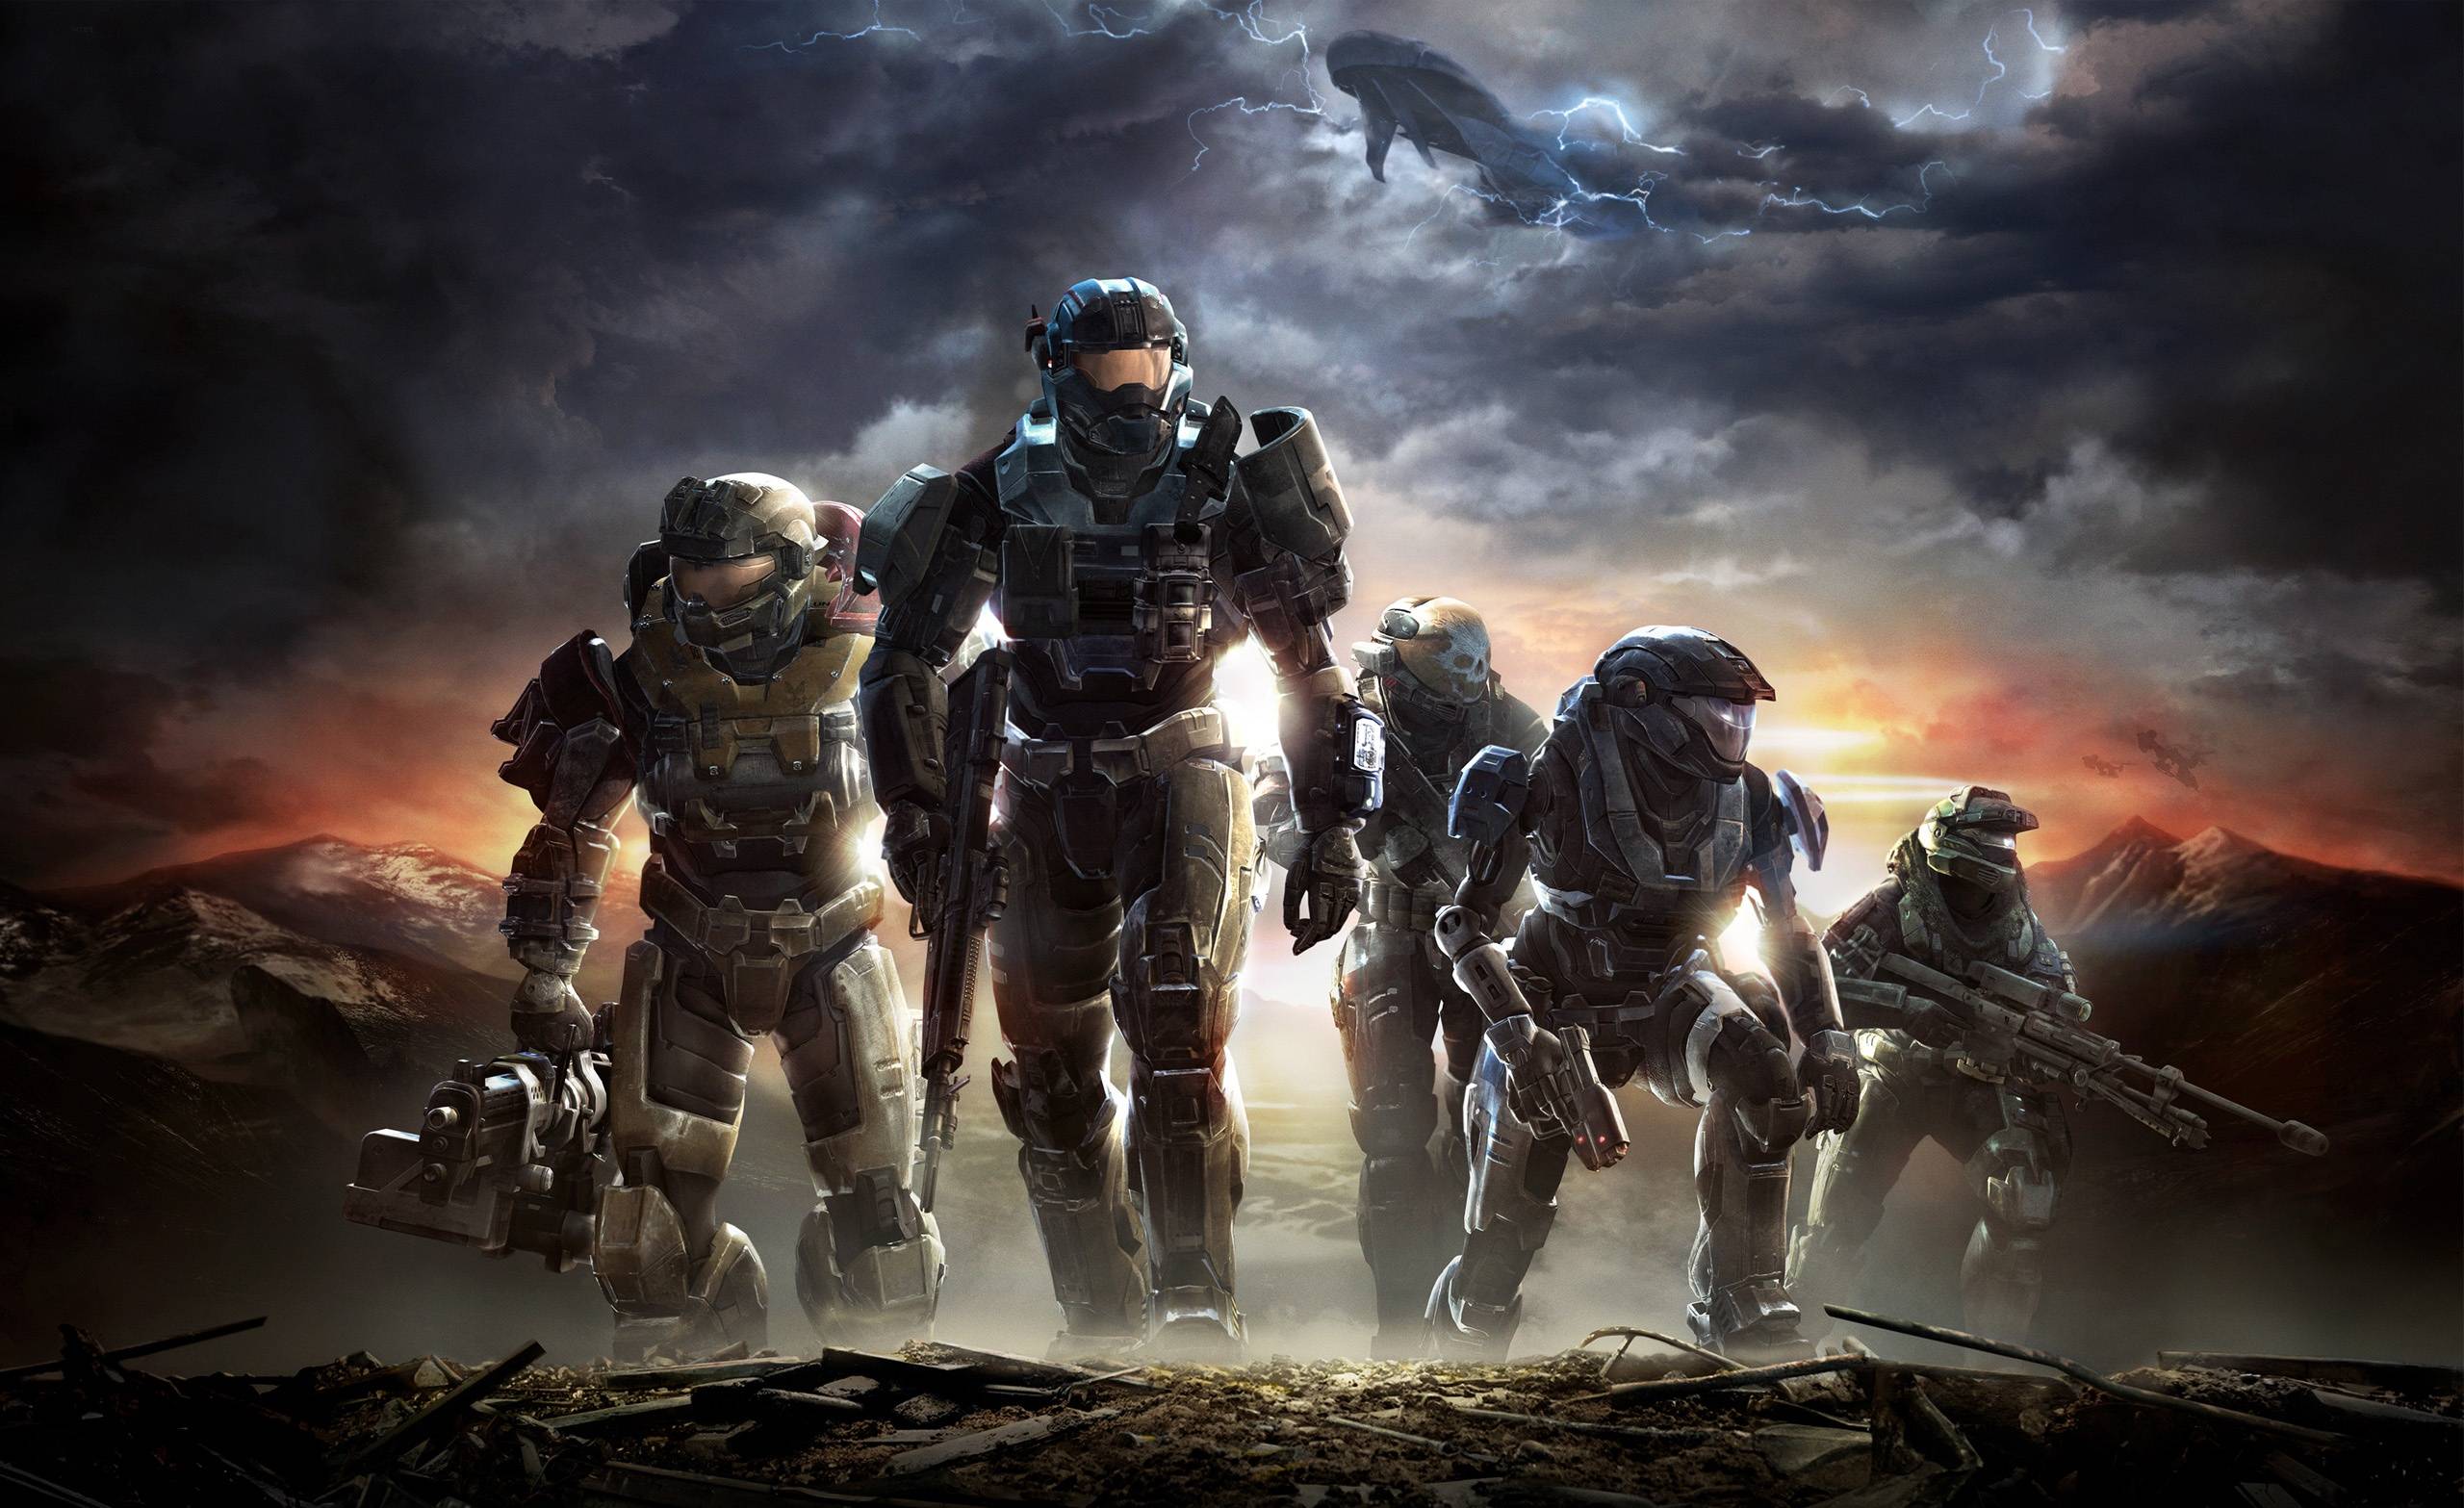 Cool Halo Wallpapers